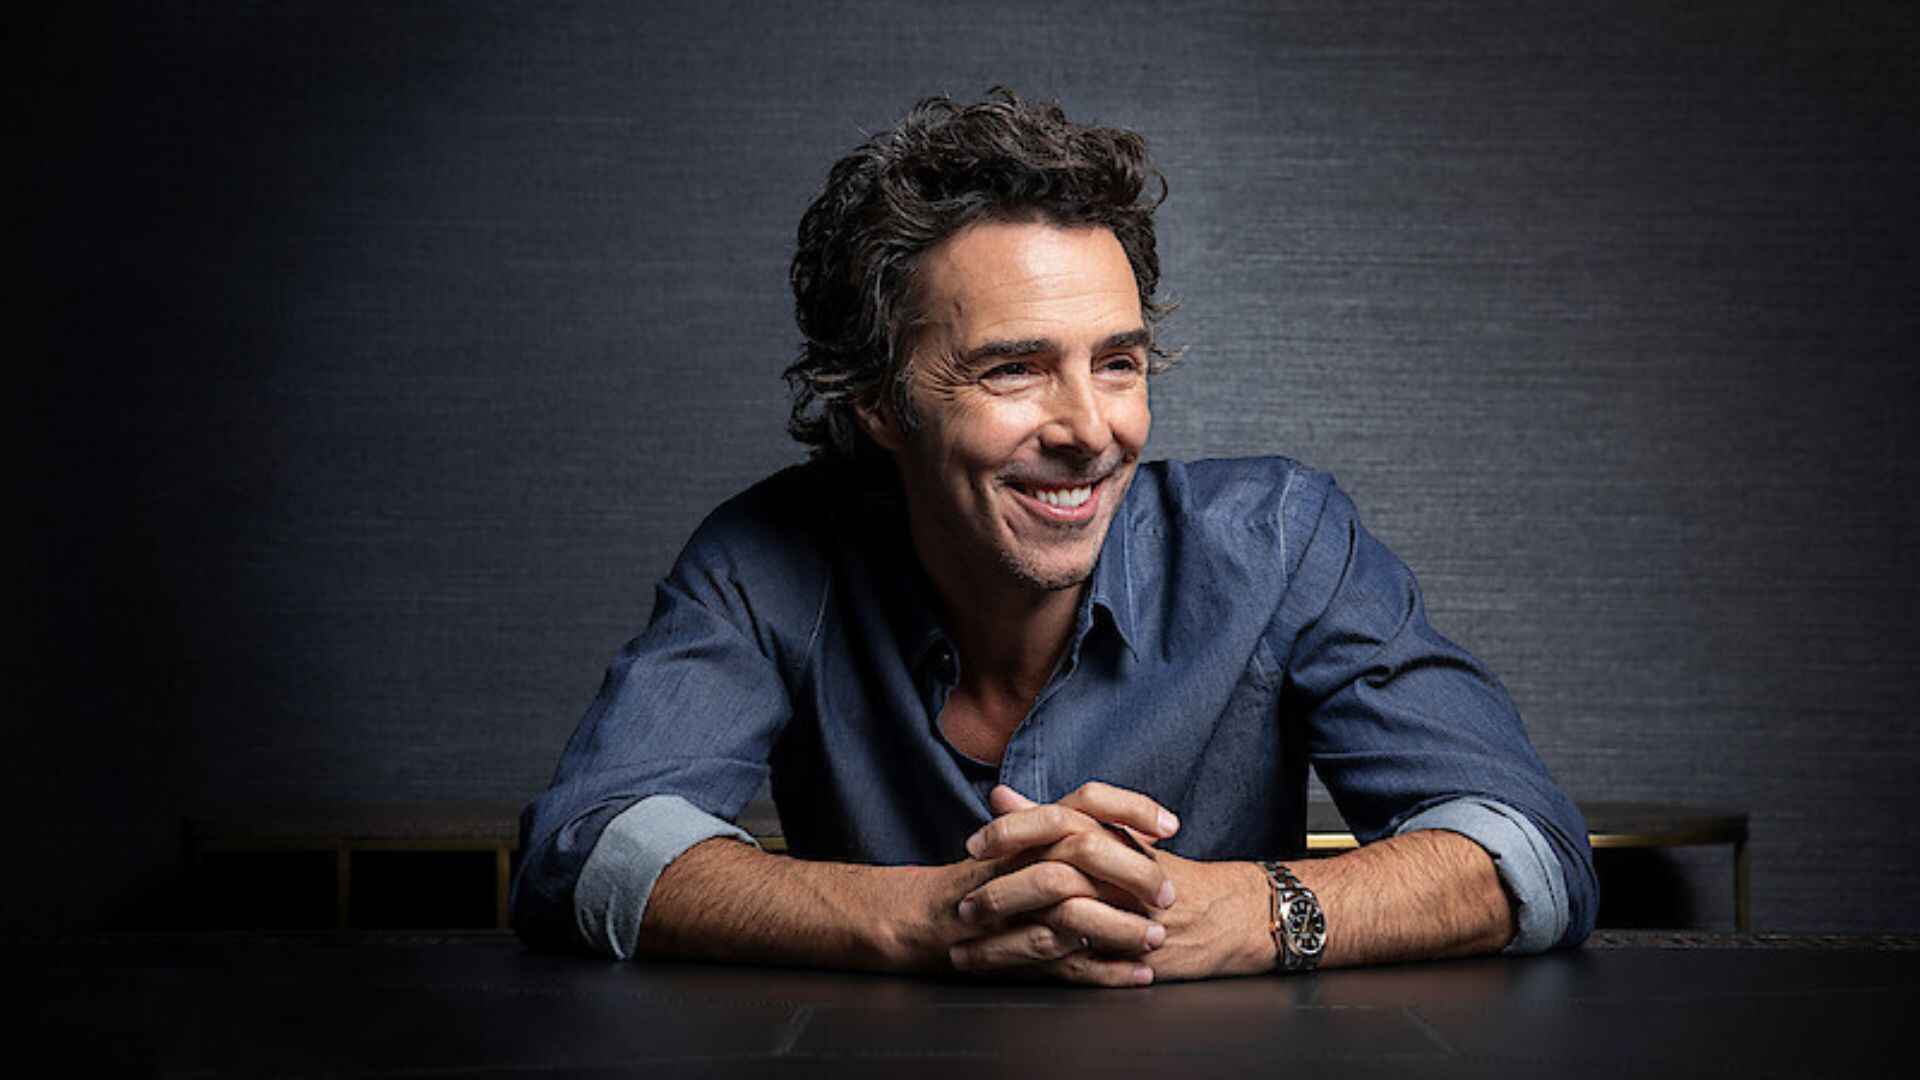 Shawn Levy to Helm Next ‘Avengers’ Movie?